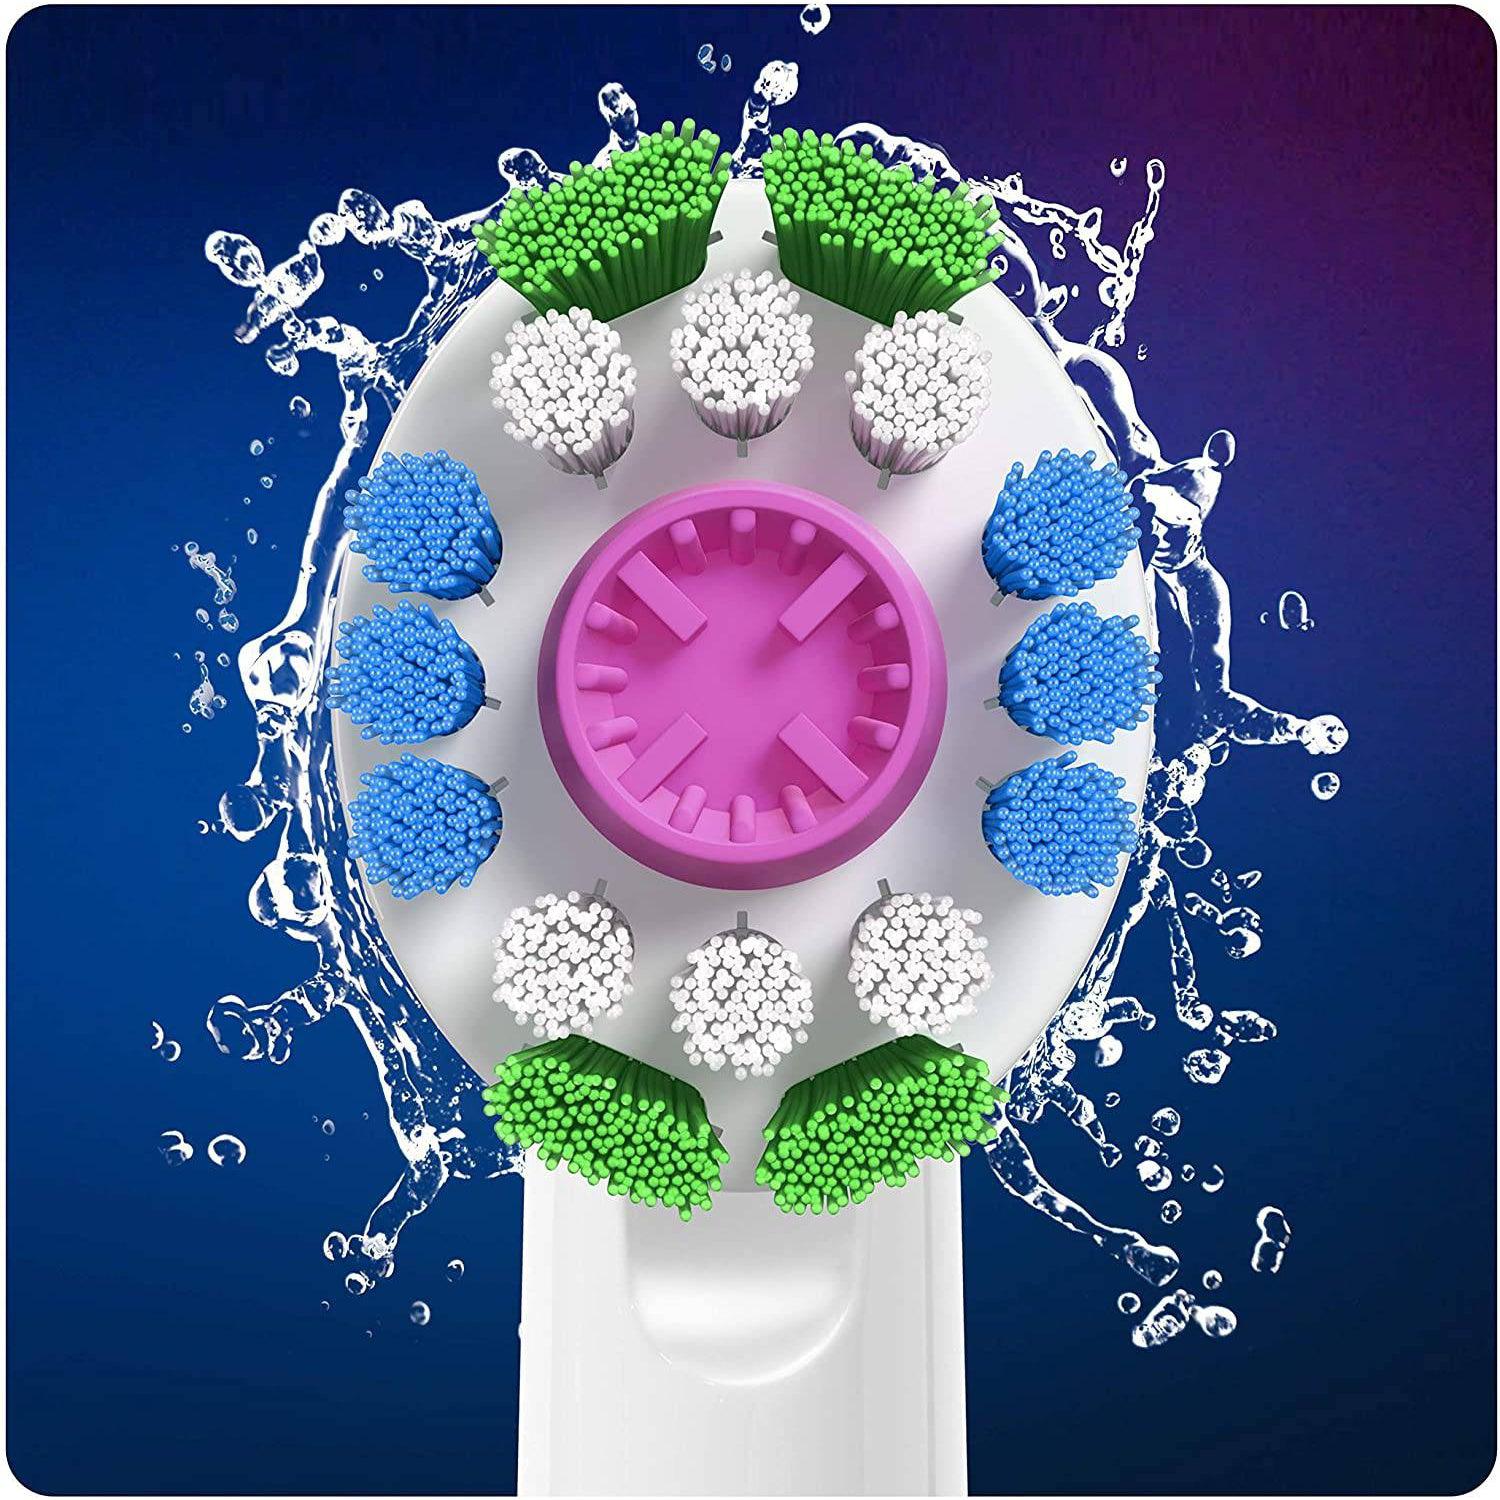 Oral-B 3D White Power Replacement Toothbrush Heads - Round Head - with Cleanmaximiser Technology Pack of 5 - Healthxpress.ie